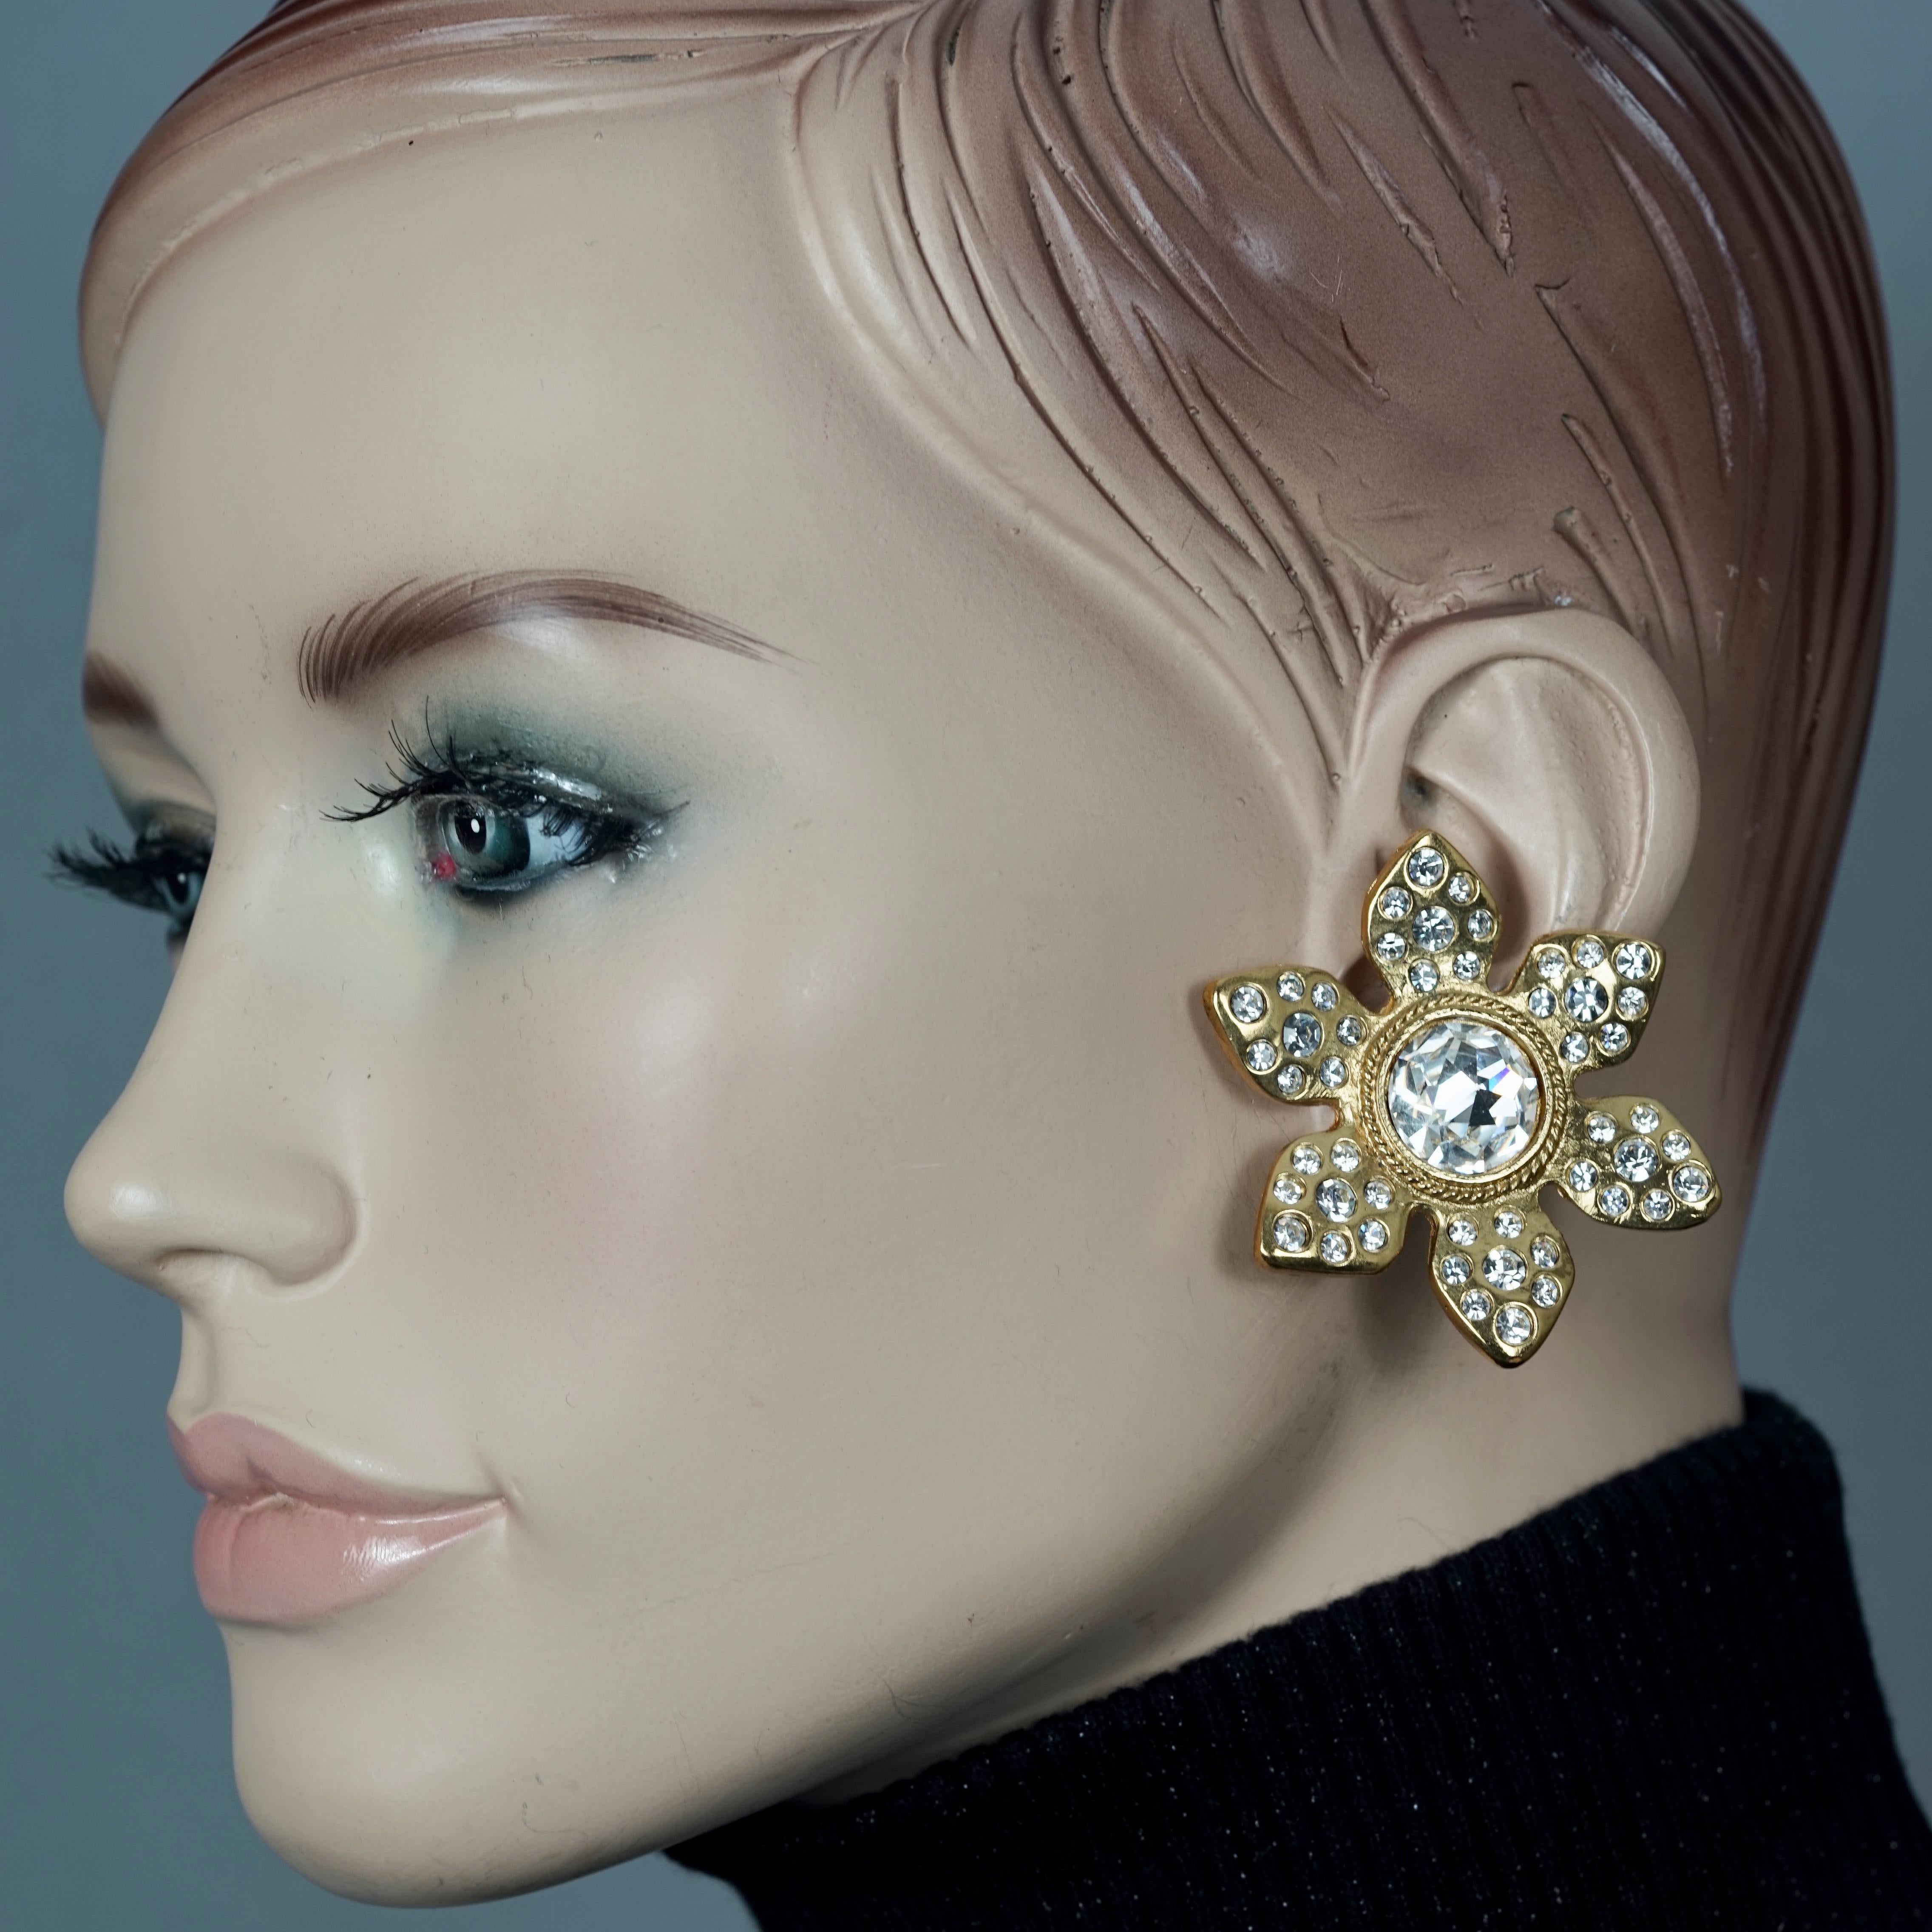 Vintage Massive YVES SAINT LAURENT Ysl Flower Rhinestone Earrings

Measurements:
Height: 2 inches (5 cms)
Width: 2 inches (5 cms)
Weight per Earring: 26 grams

Features:
- 100% Authentic YVES SAINT LAURENT.
- Massive flower earrings studded with